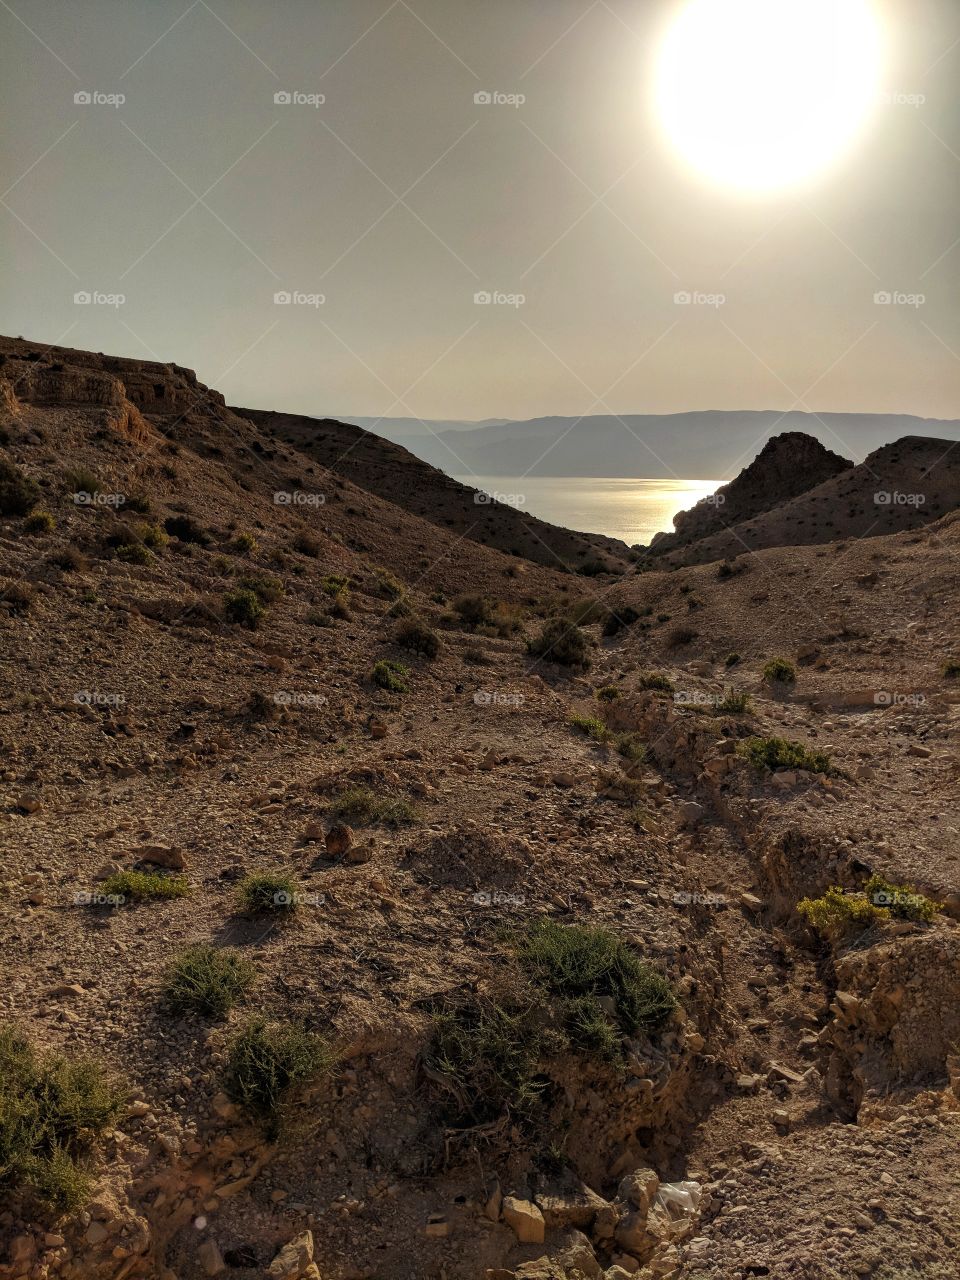 Beautiful landscape of the Dead Sea viewed from the cliff of the Judaean desert